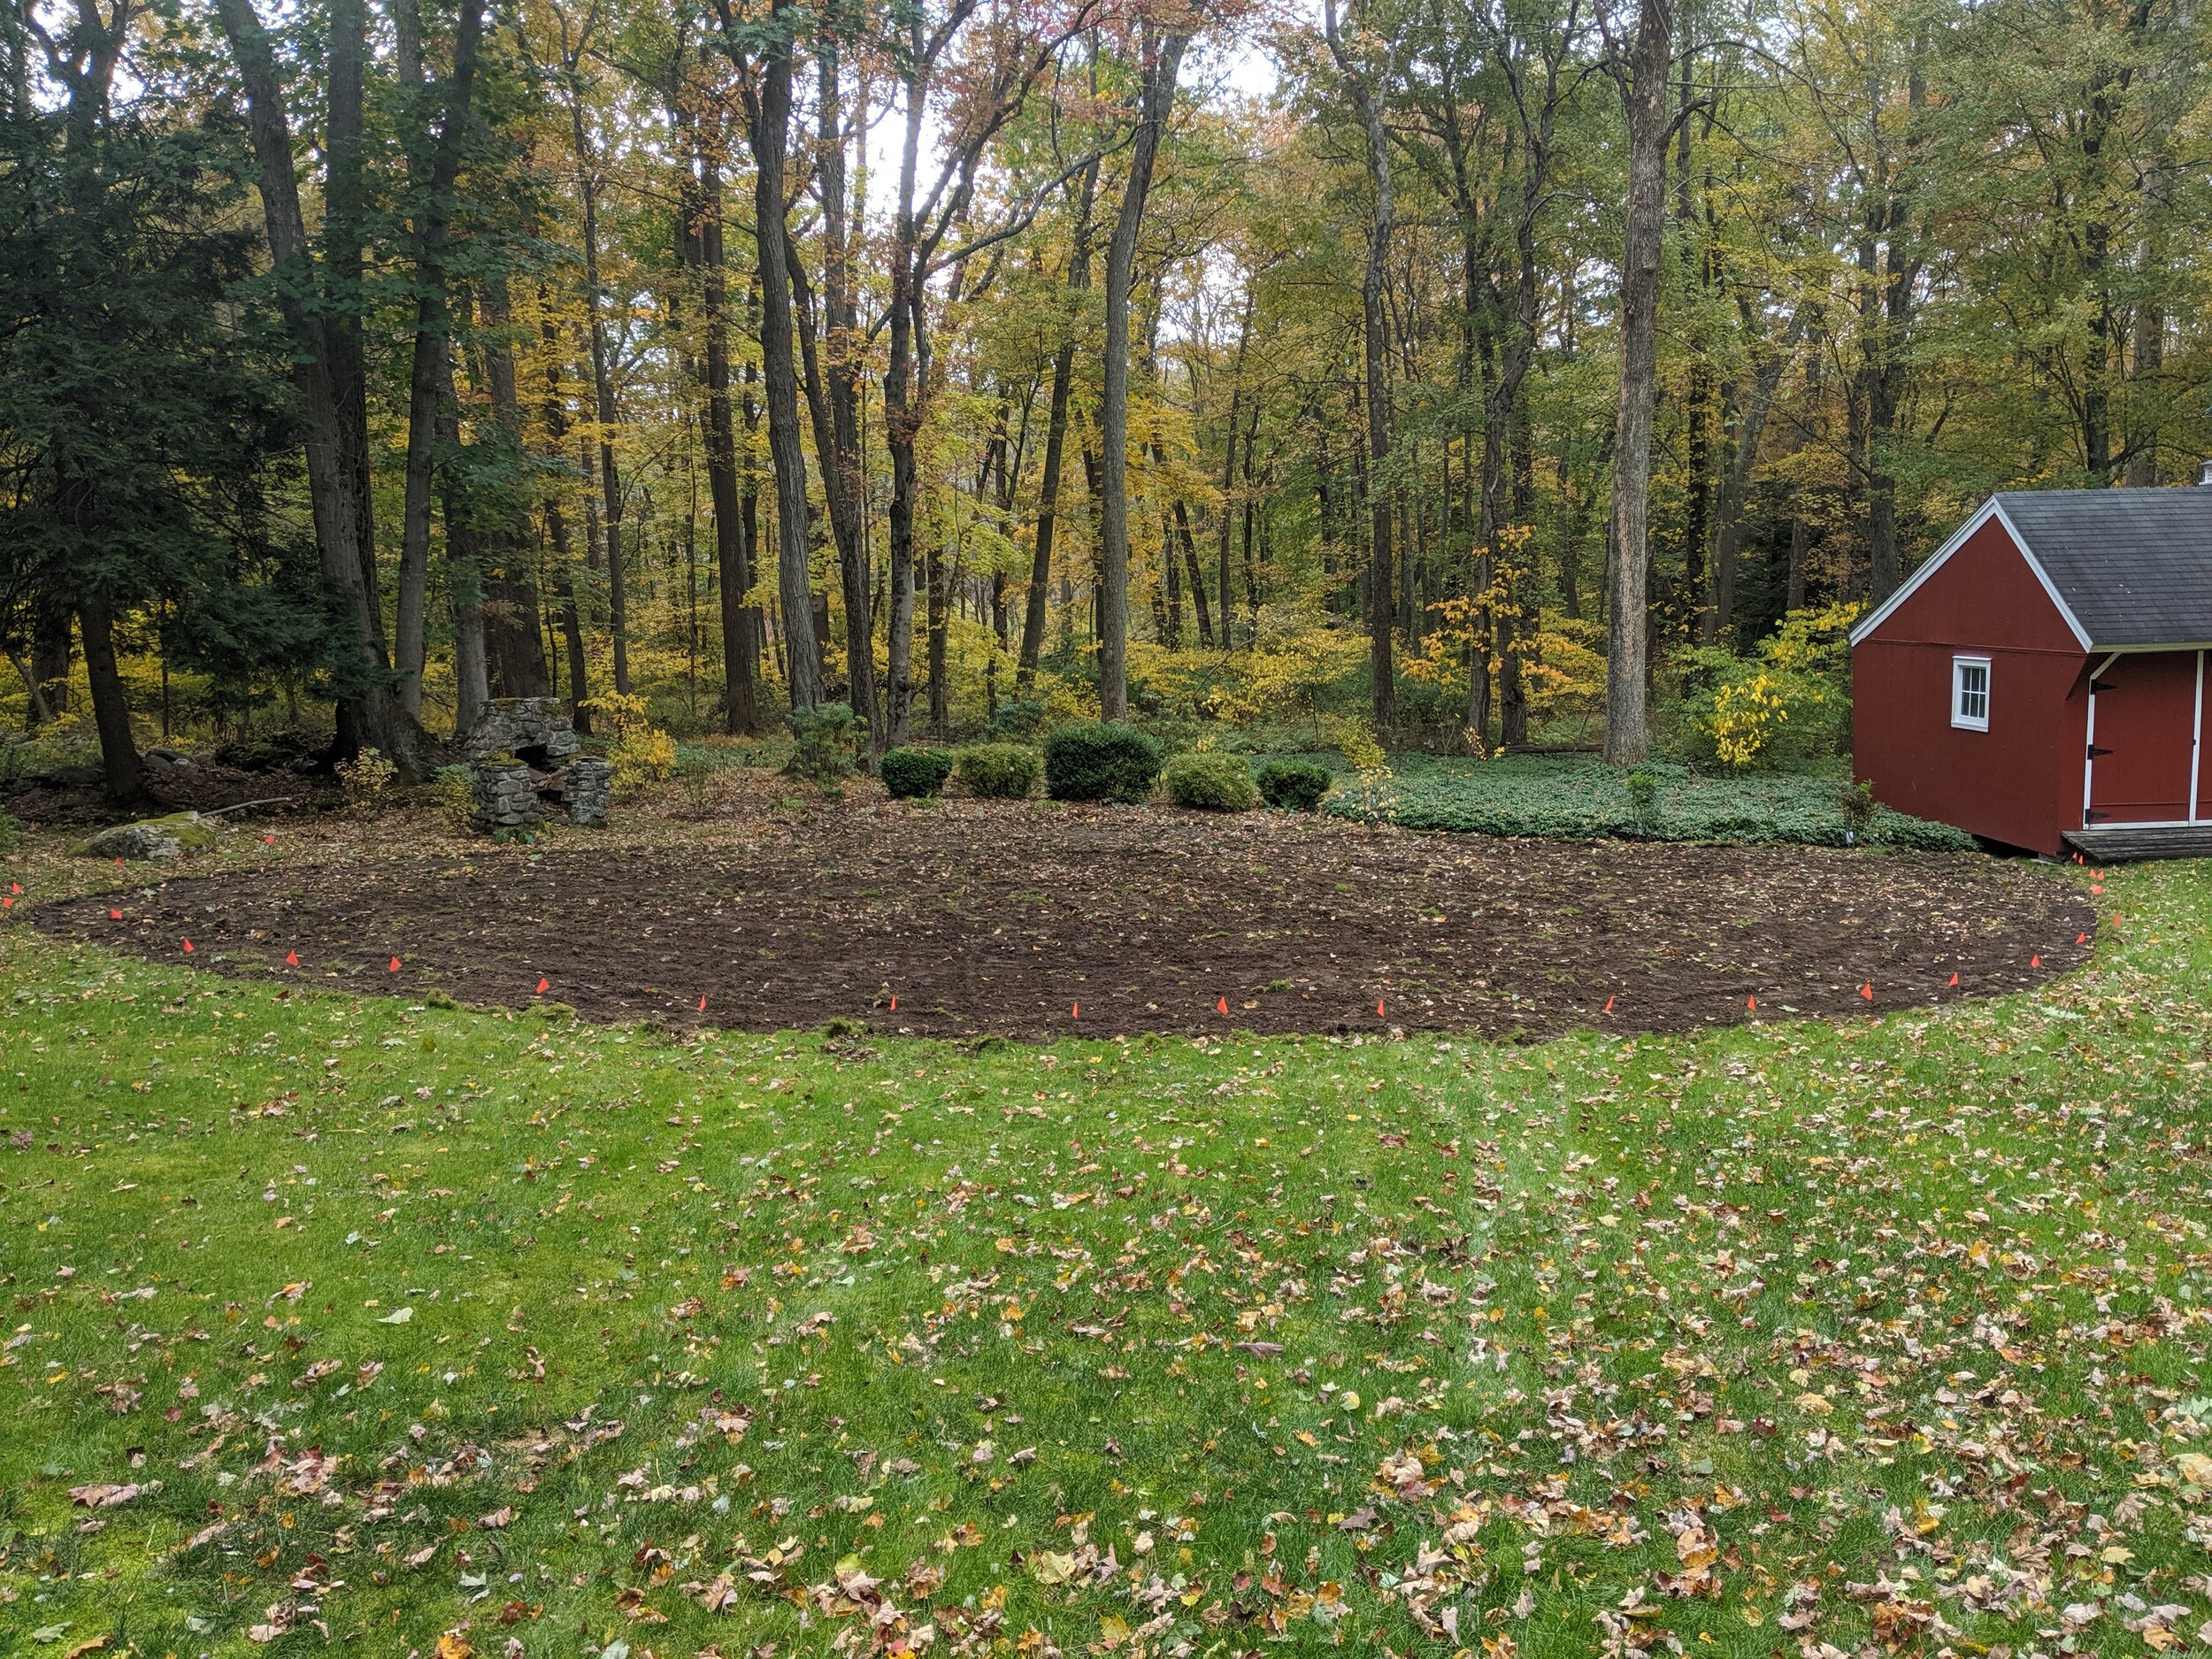  This lawn was shaded and wet. Once the sod was removed, it was planted with seed from plants that will be deer resistant and do well in wet, shady conditions. This added diversity will add color and pollinator diversity throughout the seasons. 